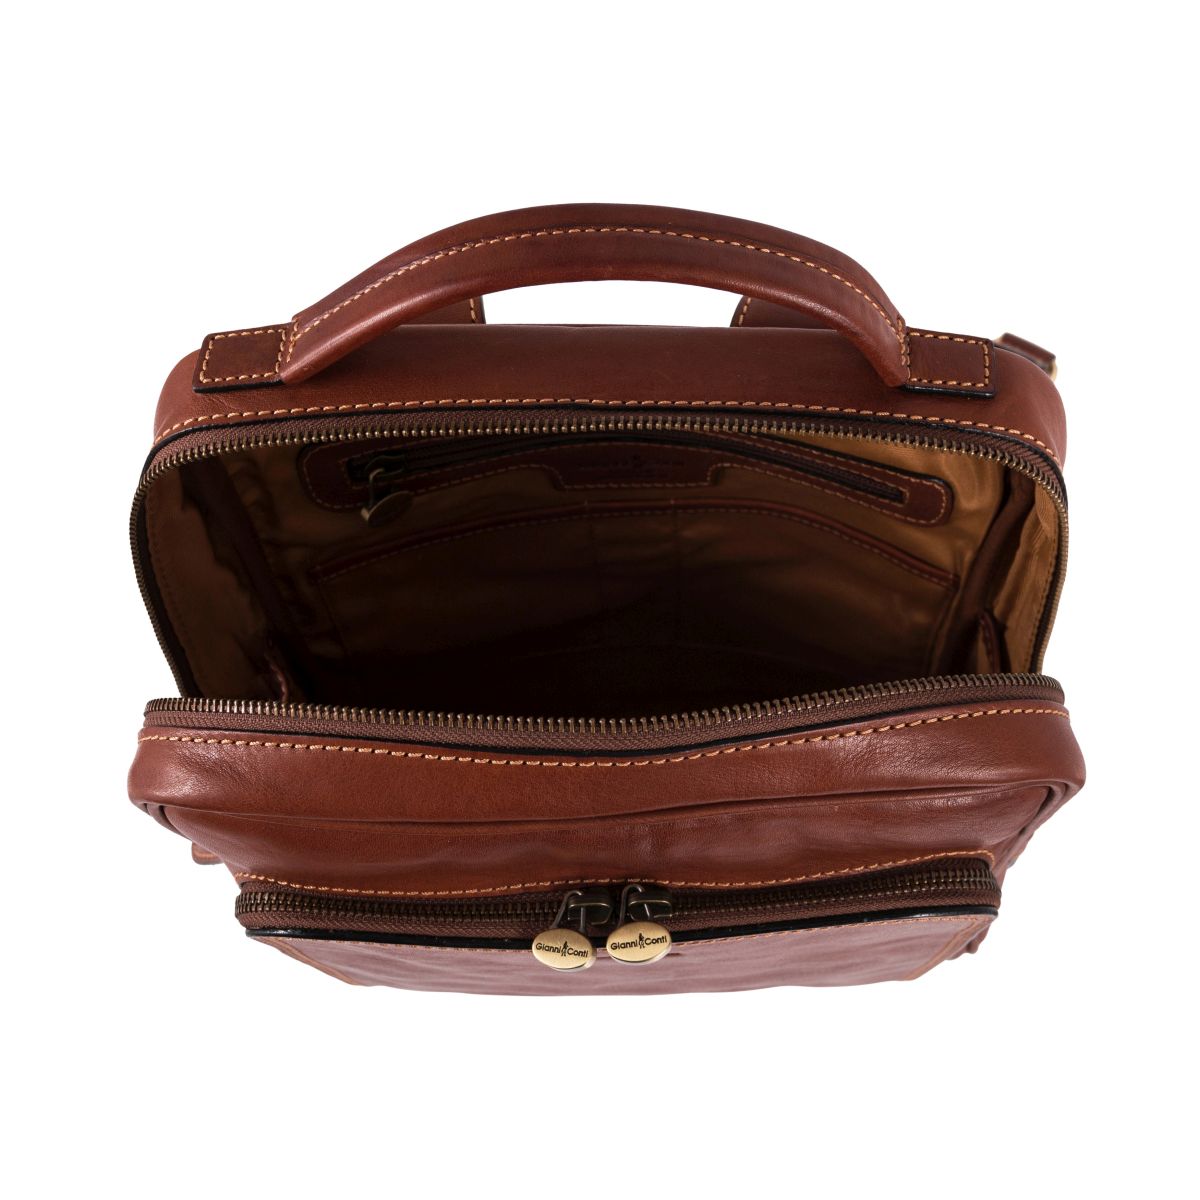 Gianni Conti Cliff Cognac Leather Backpack